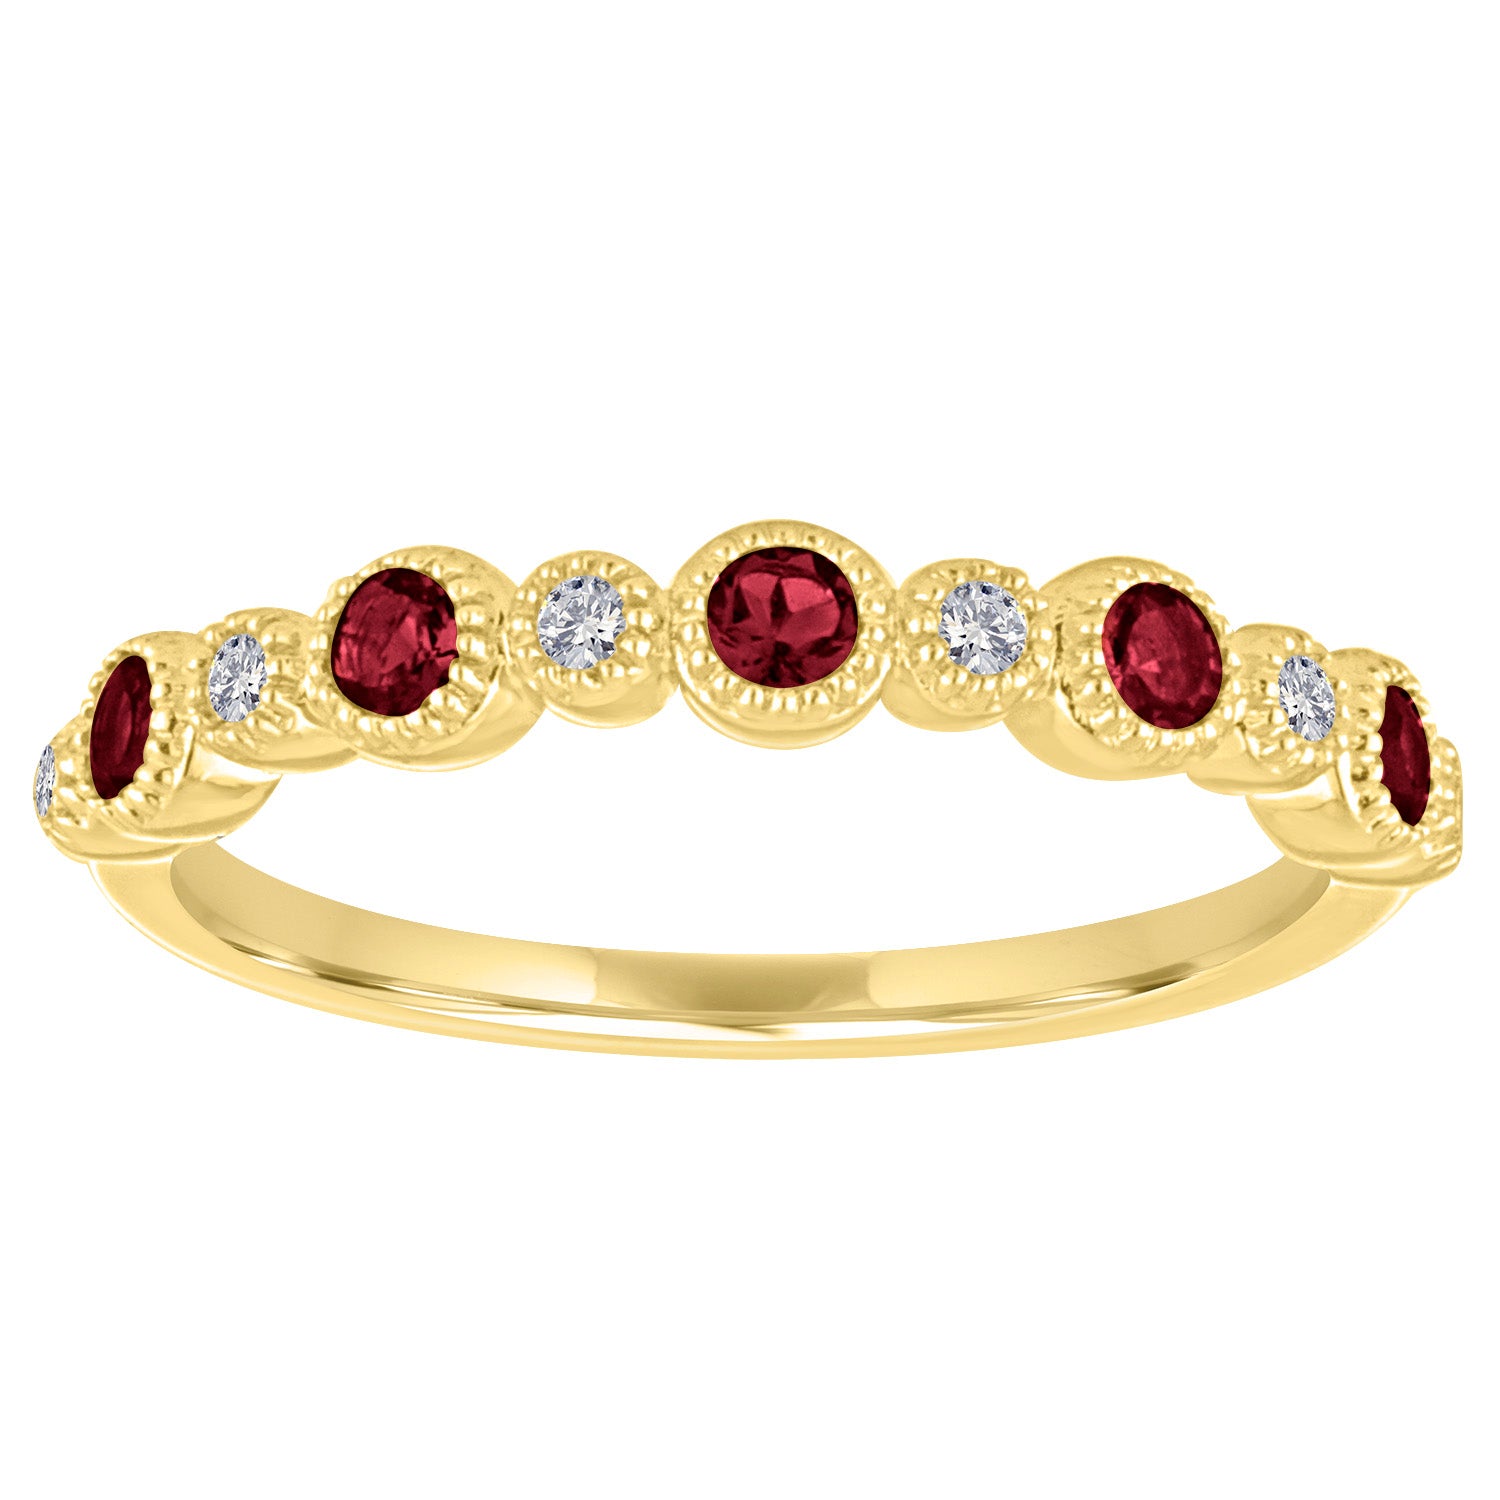 Yellow gold skinny band with large round garnets and small round diamonds.